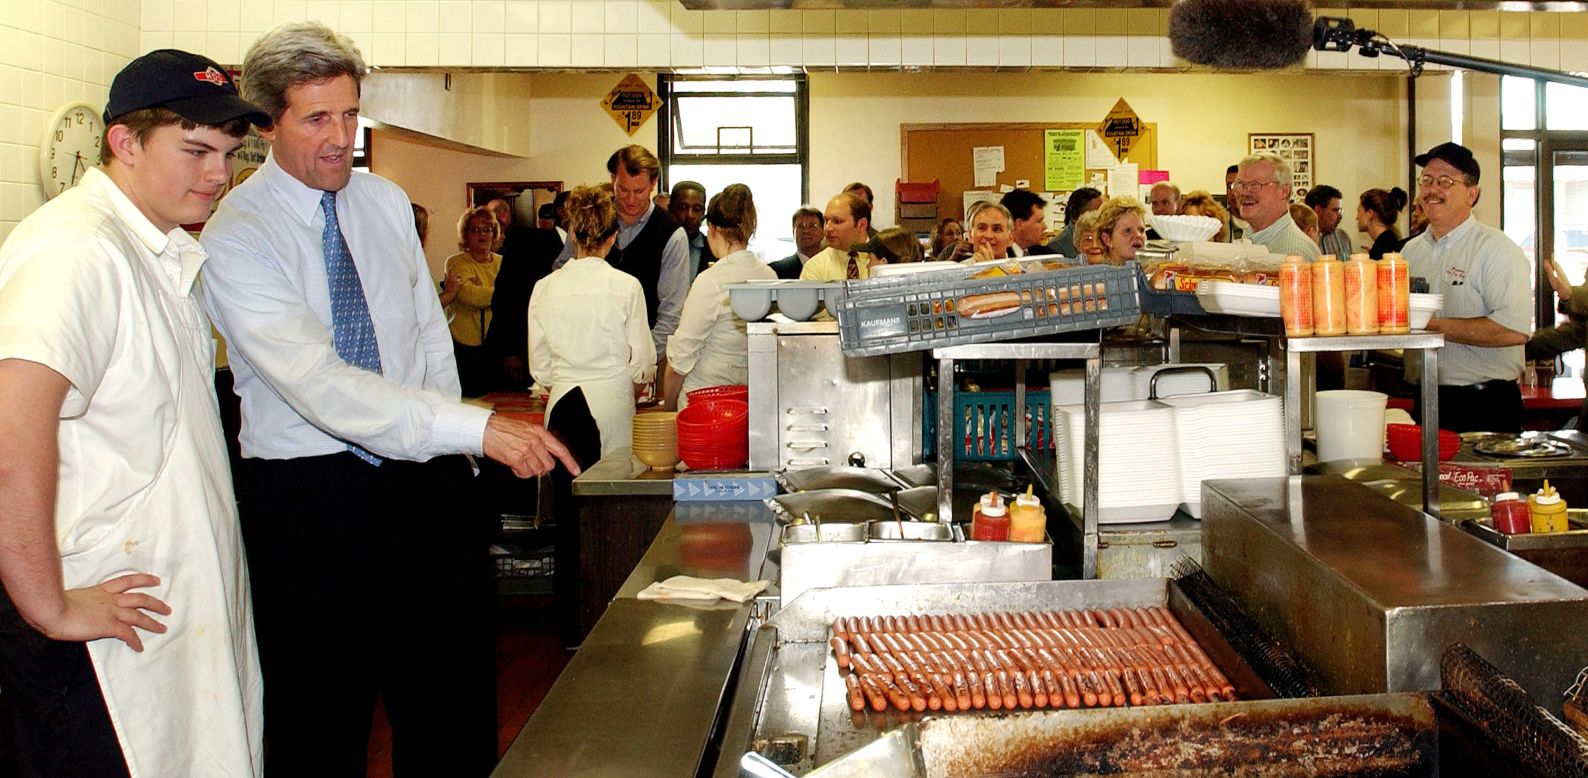 Then-Democratic presidential hopeful Sen. John Kerry of Massachusetts, right, speaks with a cook at the hot dog grill during an impromptu stop at the Brighton Hot Dog Shoppe on April 26, 2004, in Beaver, Pennsylvania.